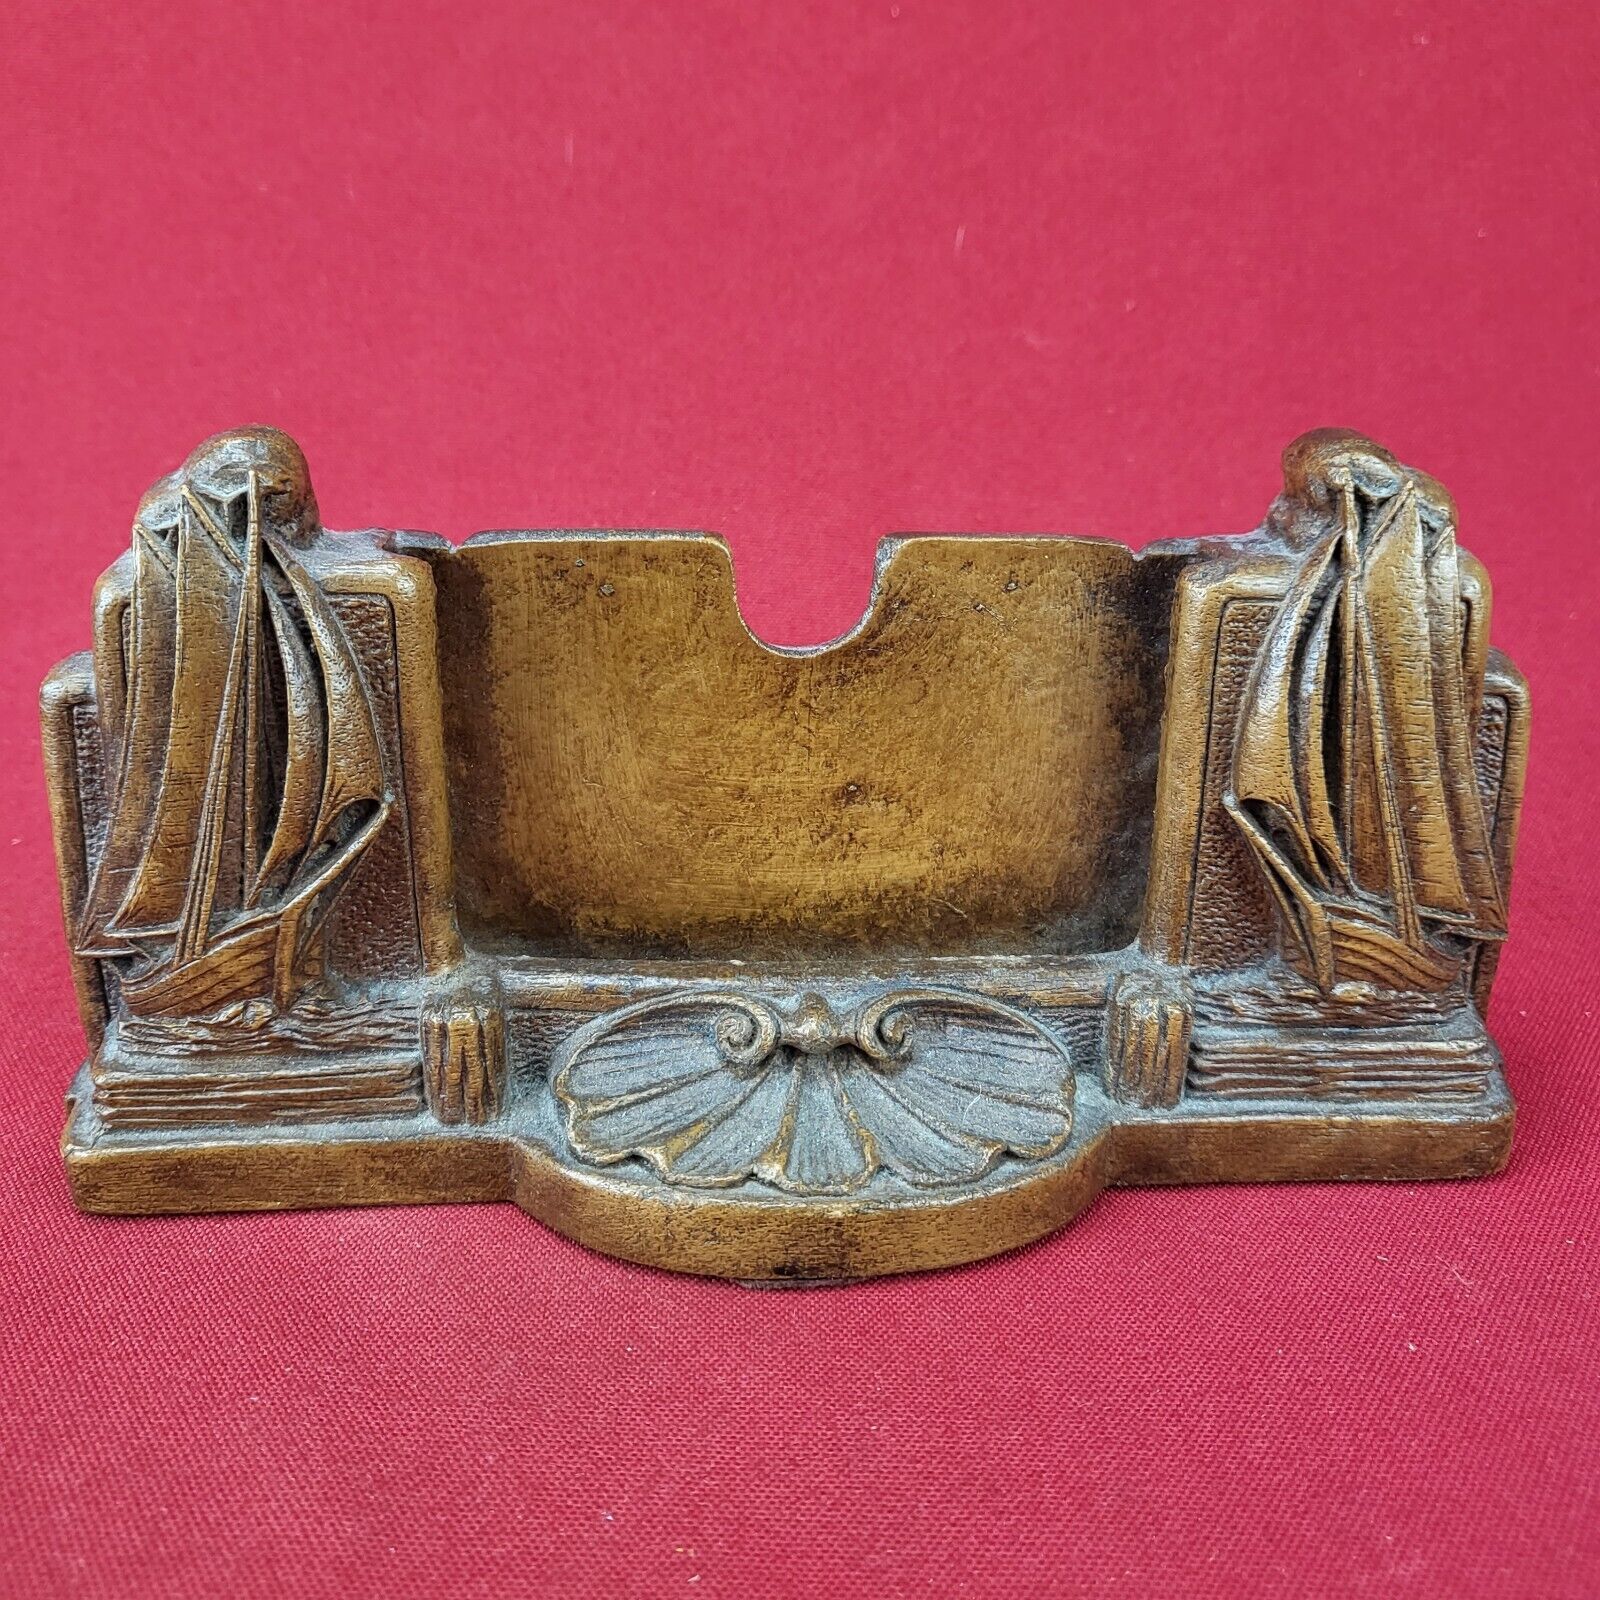 Vintage Syroco Wood Hand Carved Business Card Holder Nautical Theme Syracuse